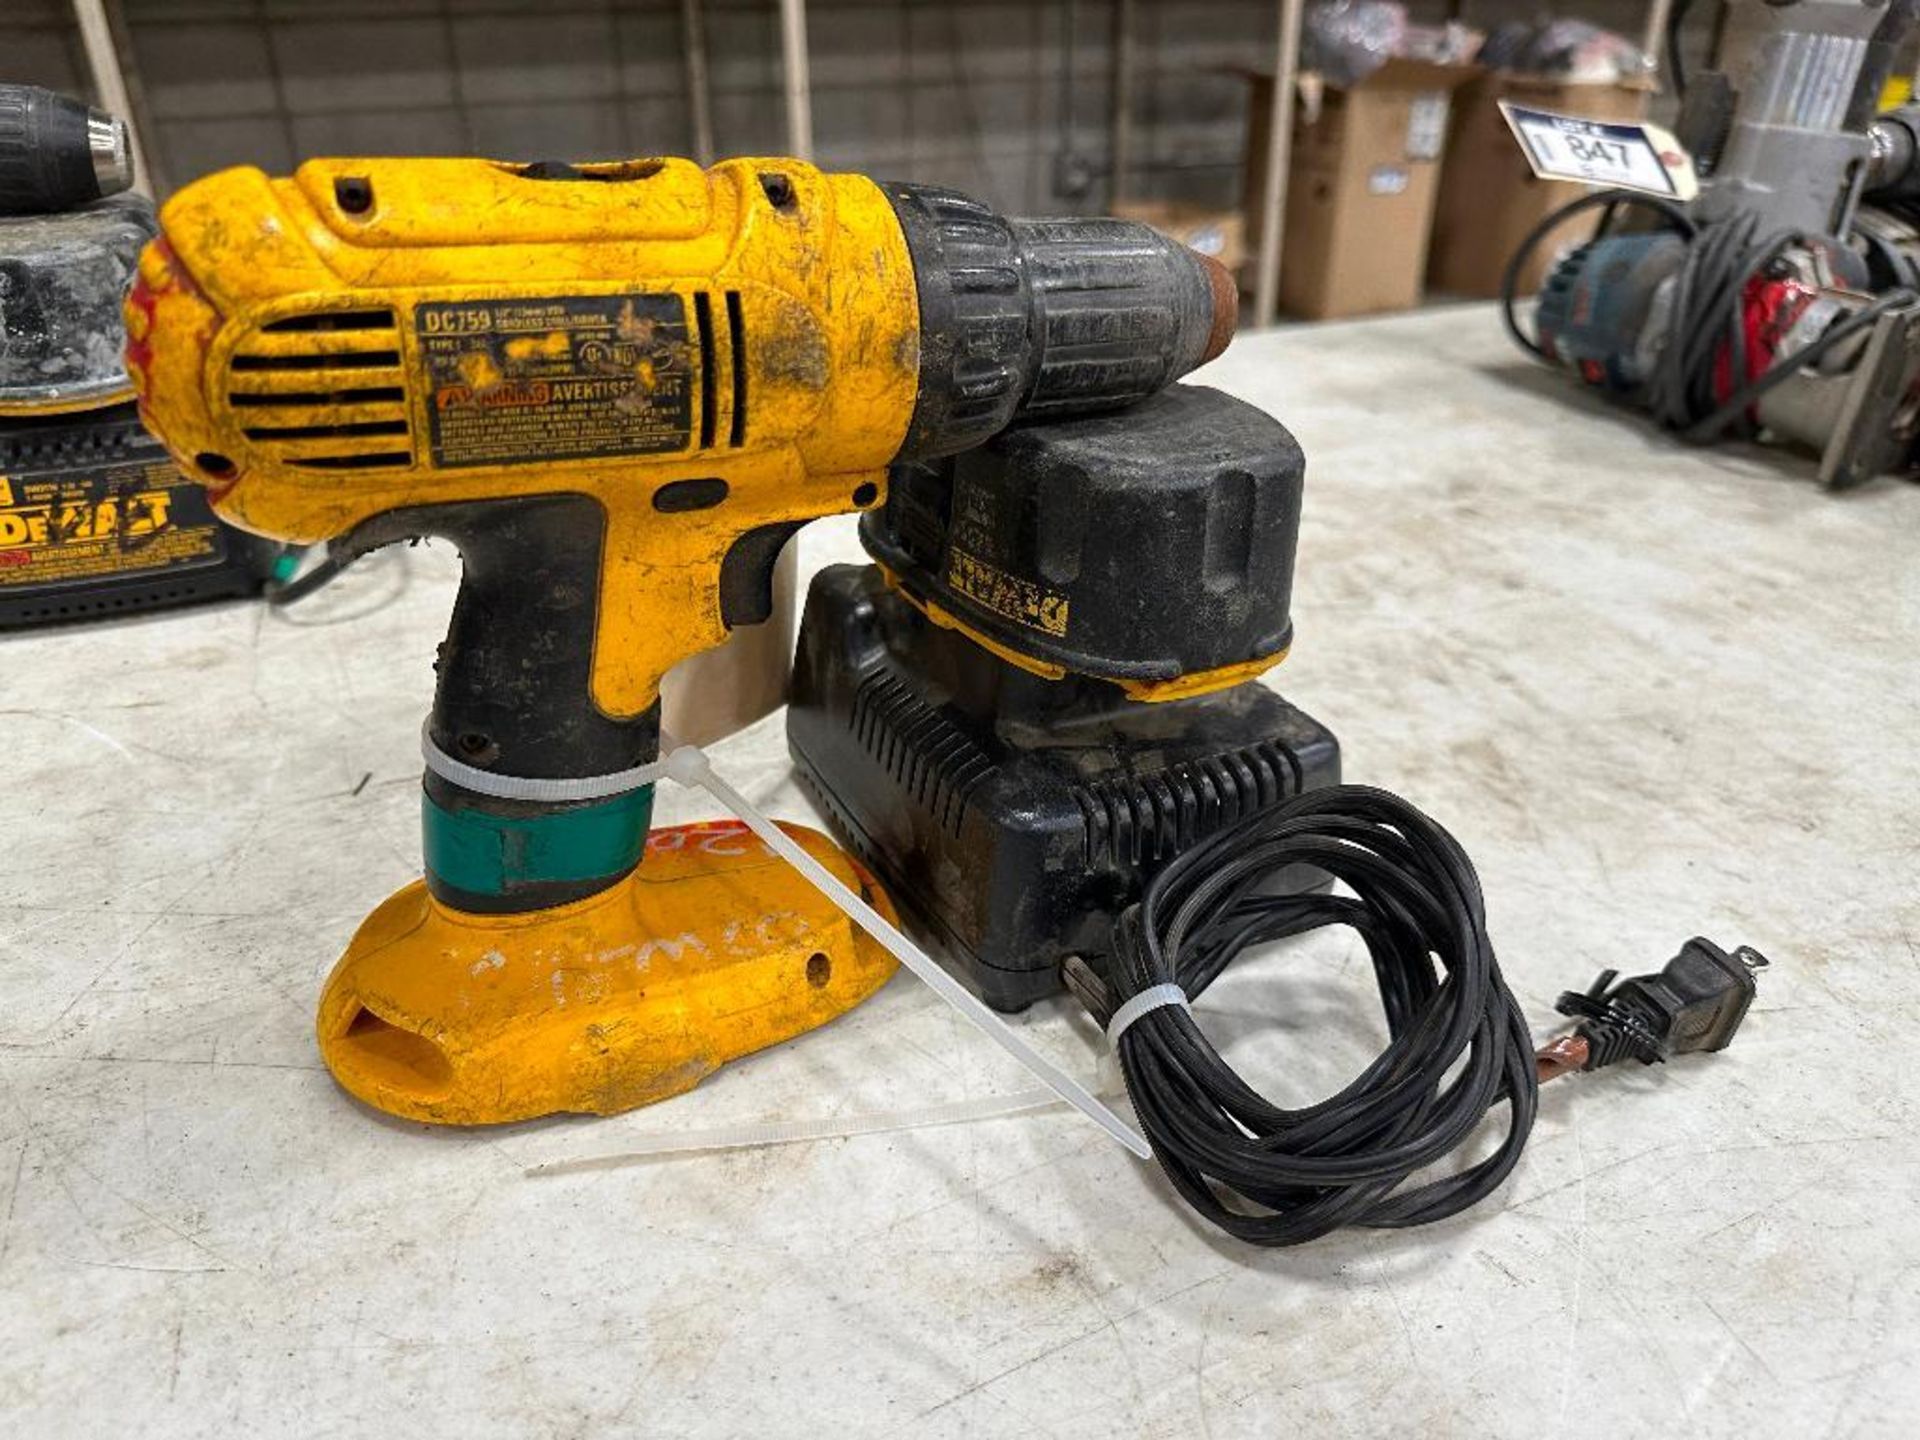 DeWalt 18V DC759 Cordless Drill w/ Battery and Charger - Image 4 of 5